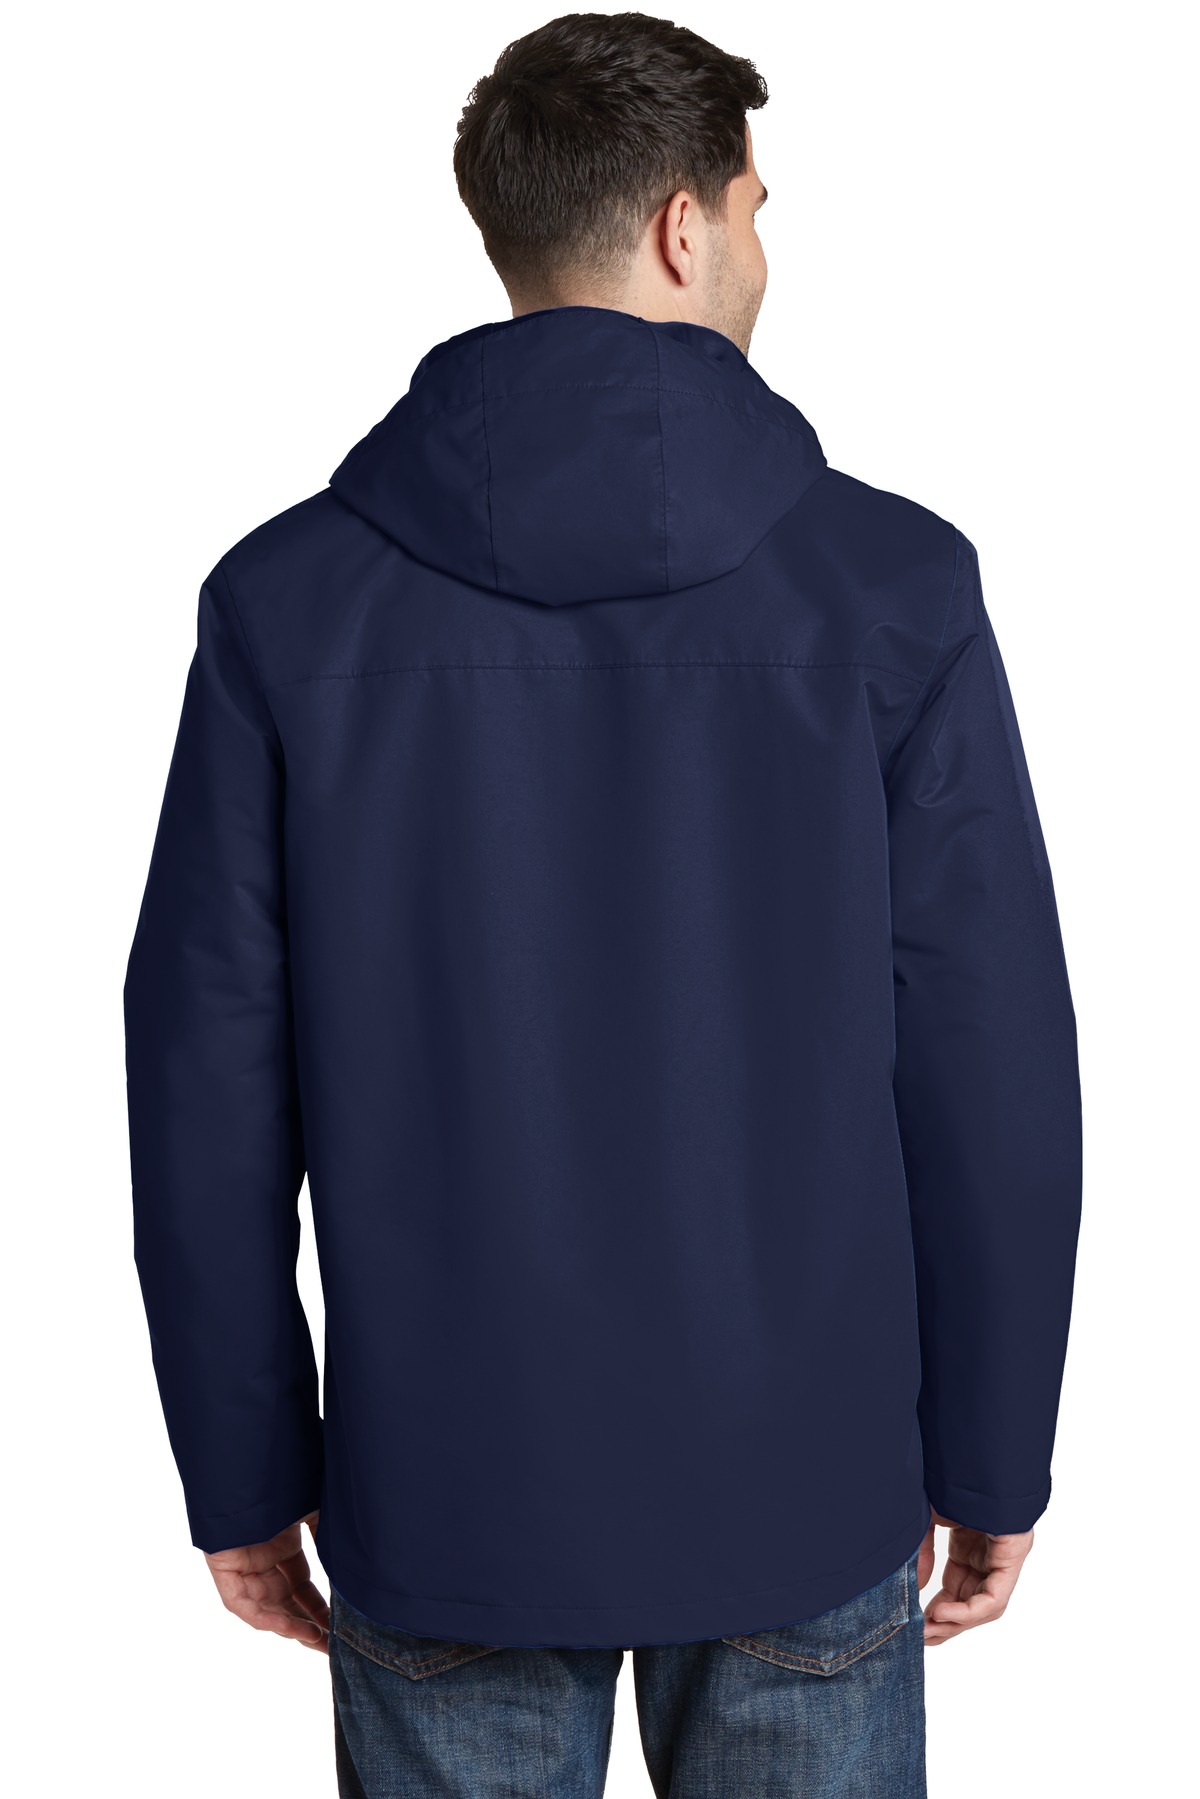 Port Authority All Conditions Jacket-M (True Navy) - image 2 of 6